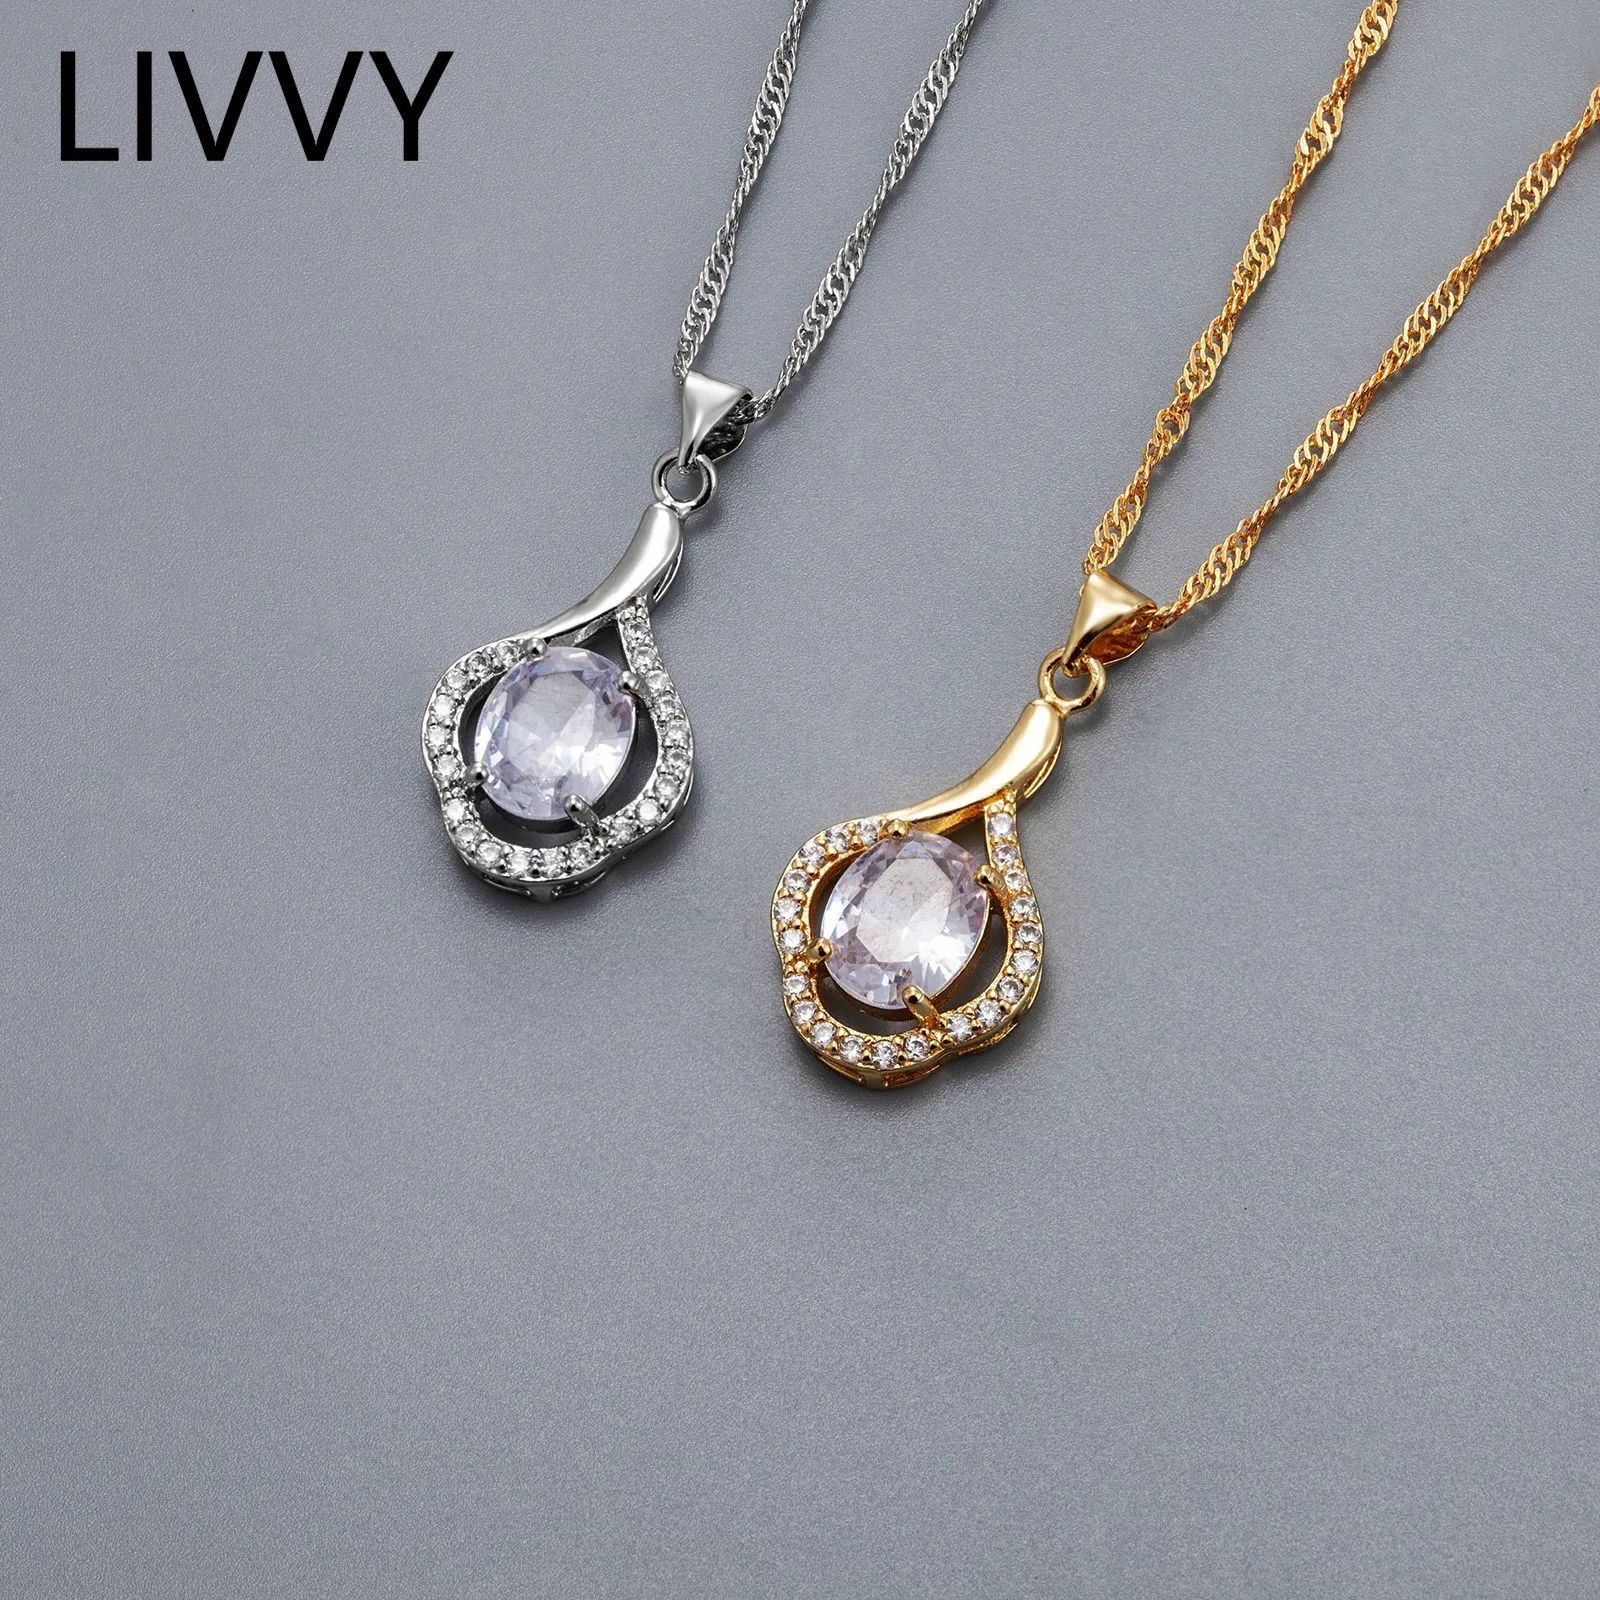 

LIVVY New Silver Color Creative Geometric Hollow Crystal Zircon Pendant Necklace For Women Trendy Elegant Clavicle Chain Jewelry